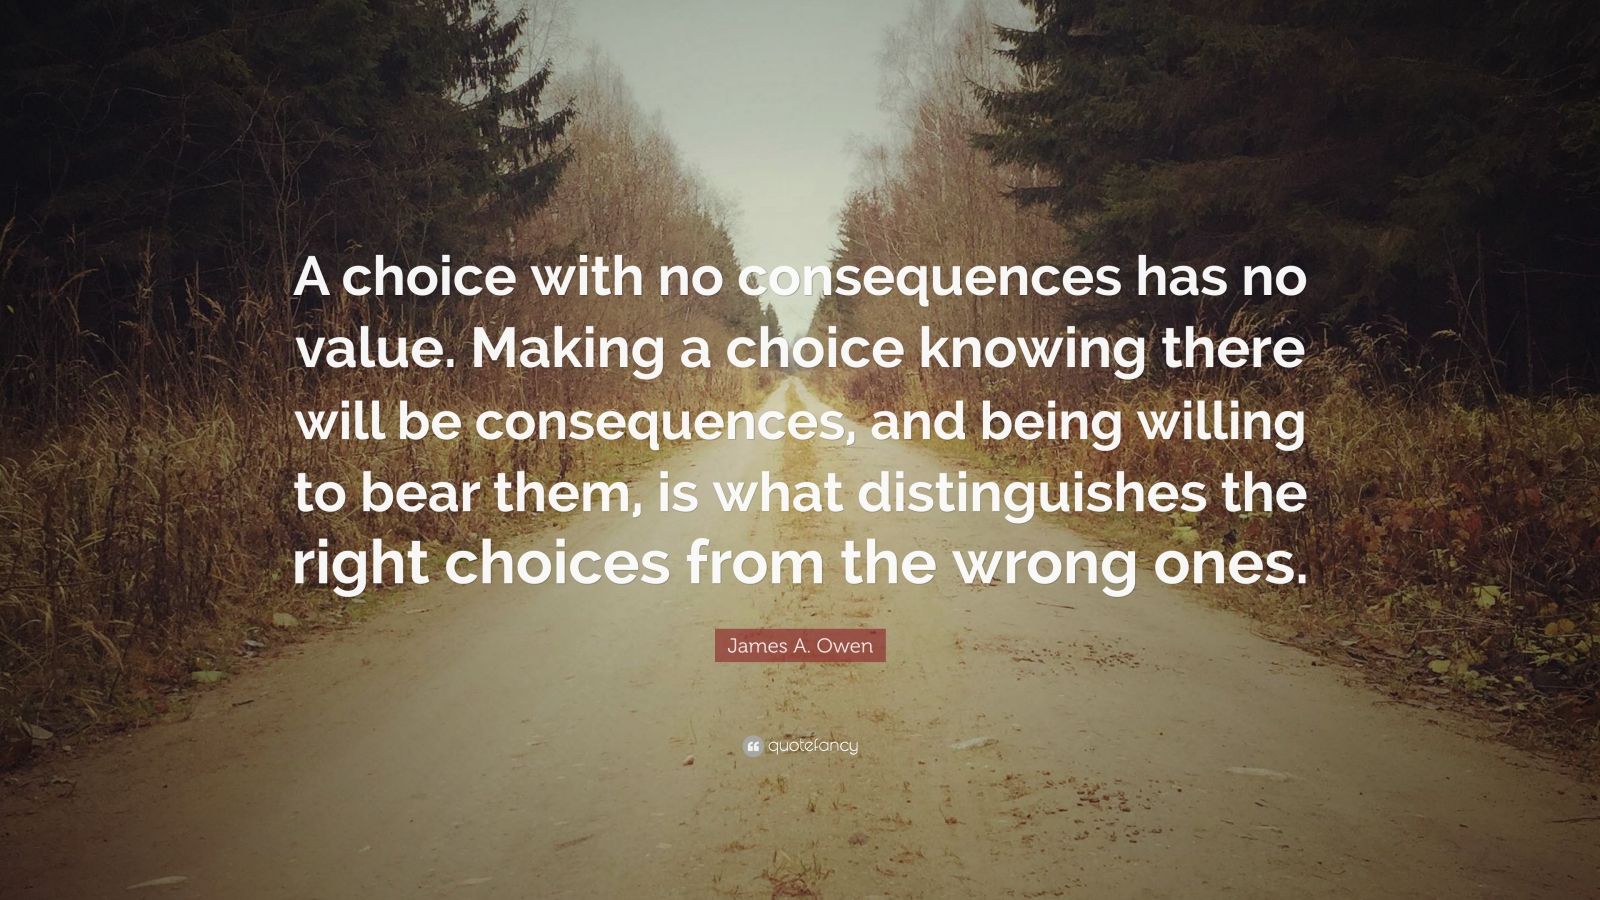 James A. Owen Quote: “A choice with no consequences has no value